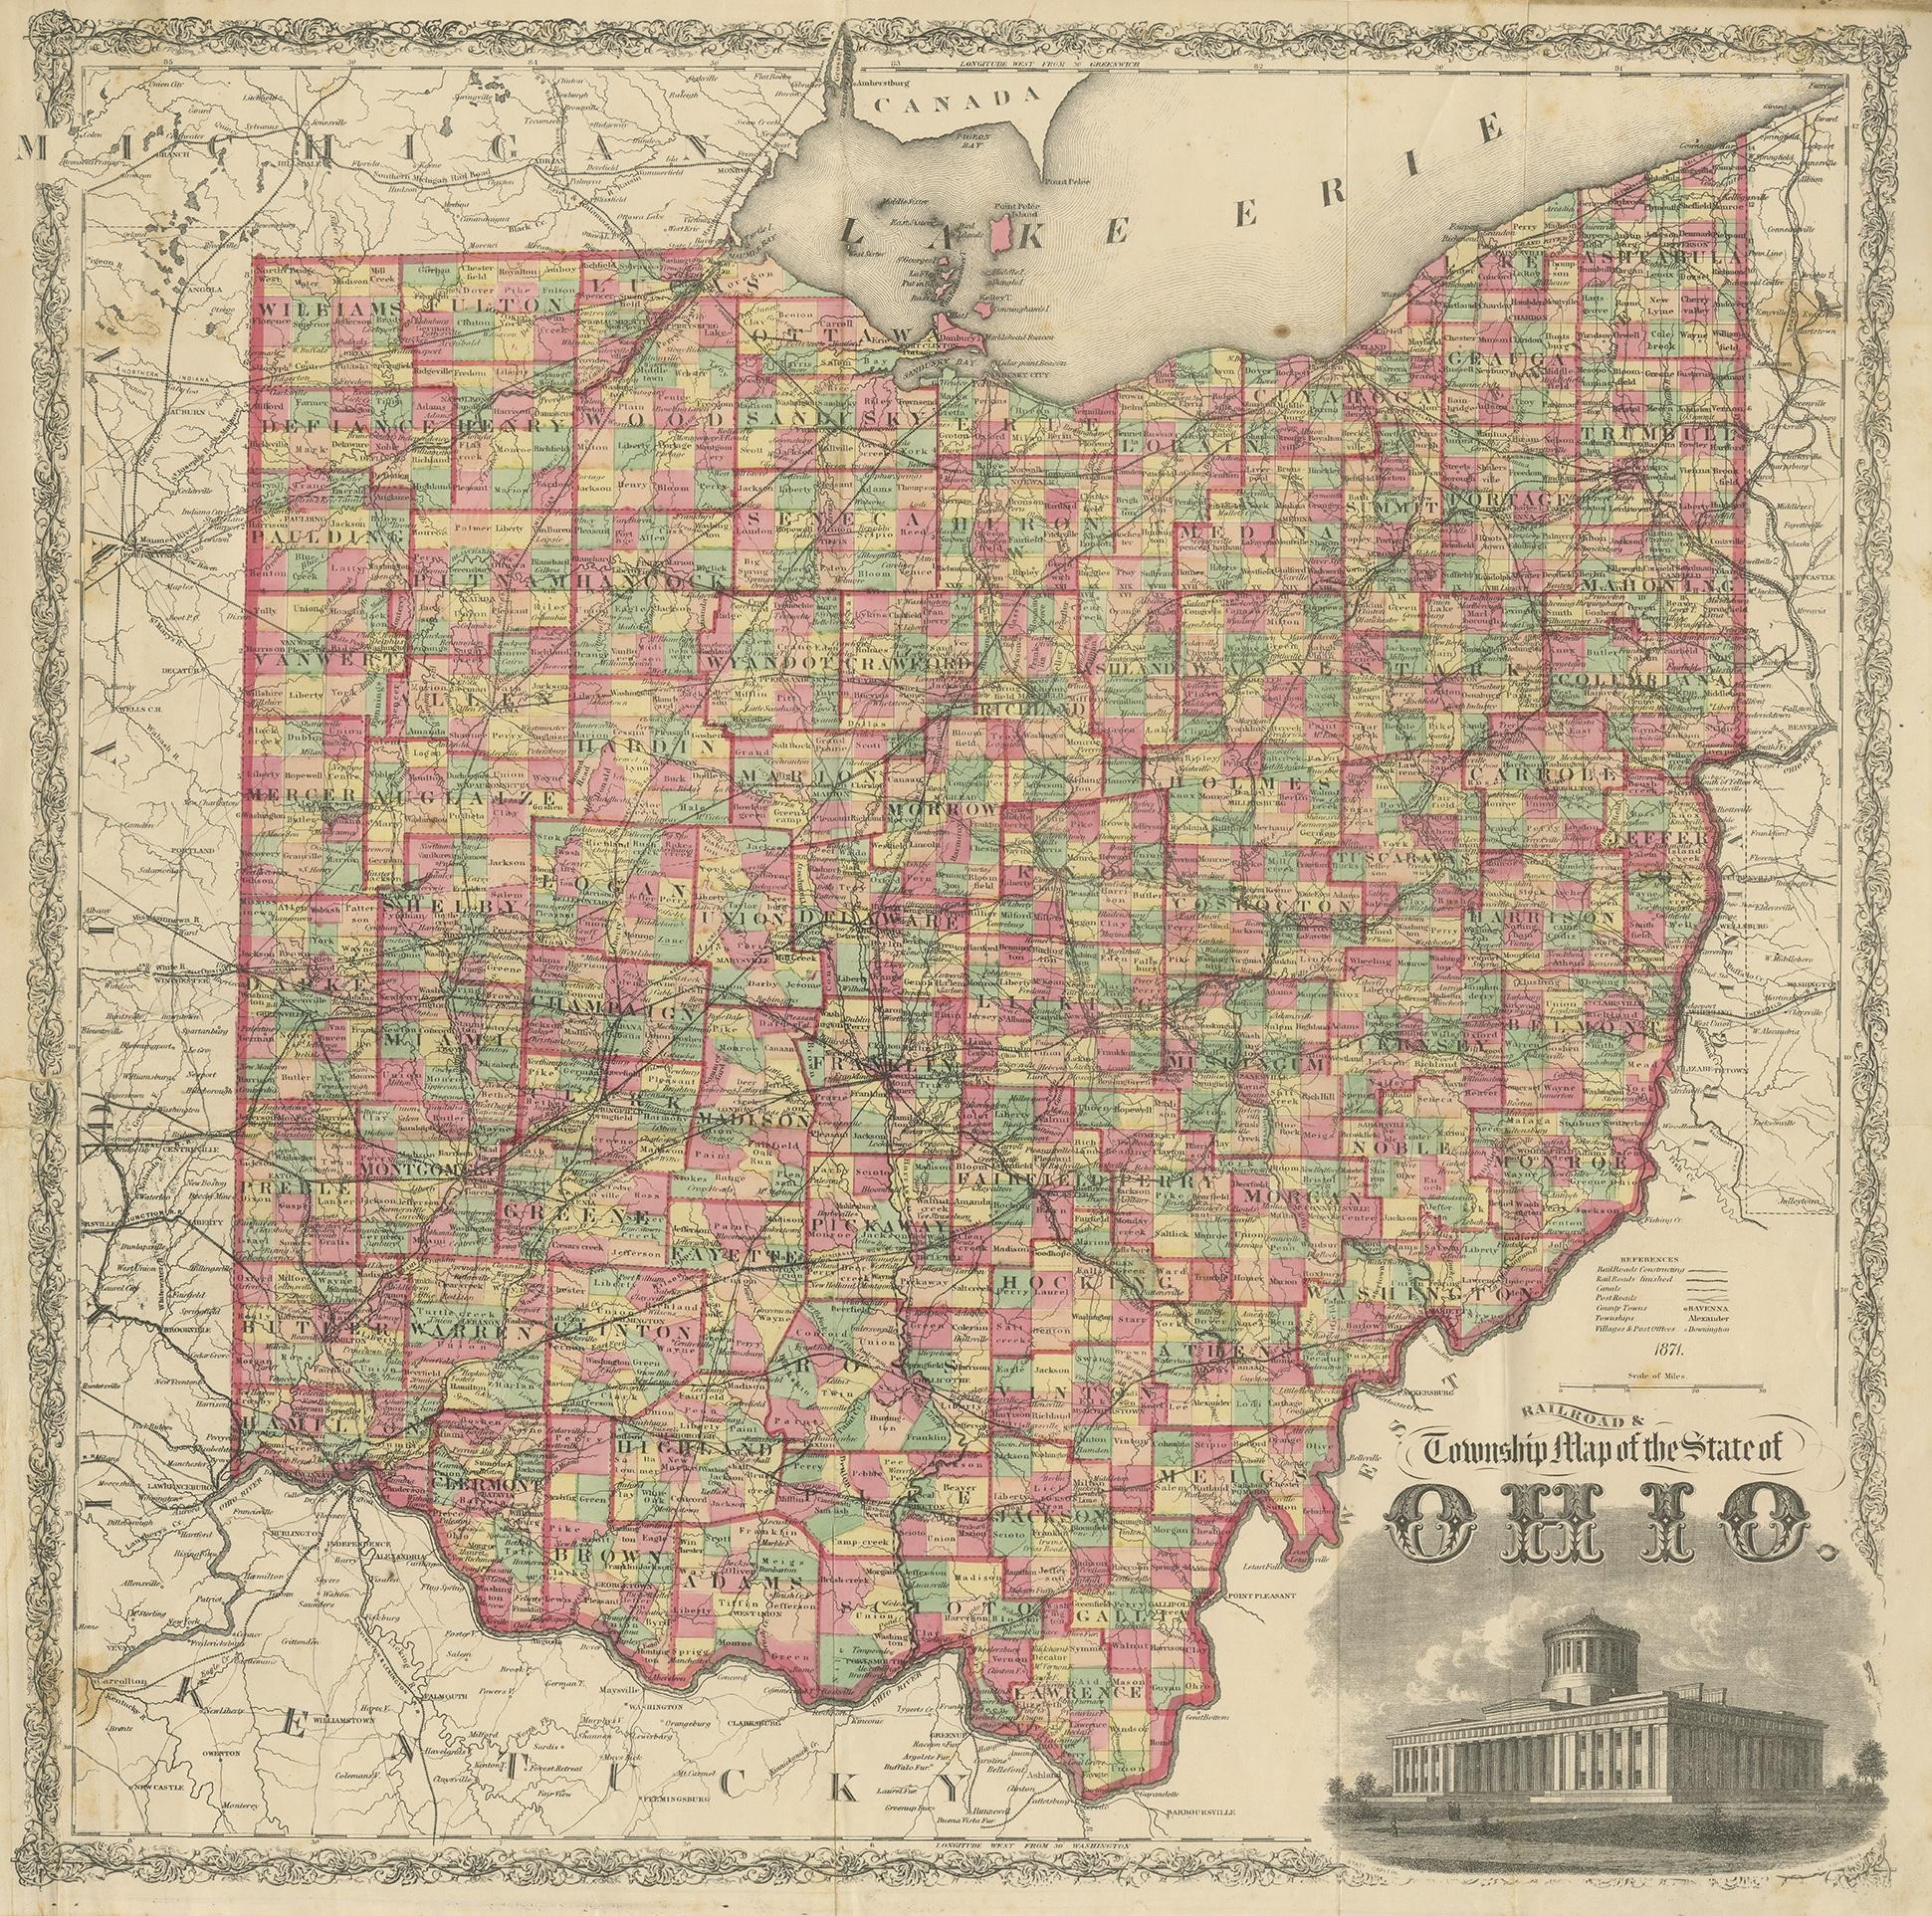 Antique map titled 'Railroad & Township Map of the State of Ohio'. Original antique map of the State of Ohio. This map originates from 'Atlas of Preble County Ohio' by C.O. Titus. Published 1871.